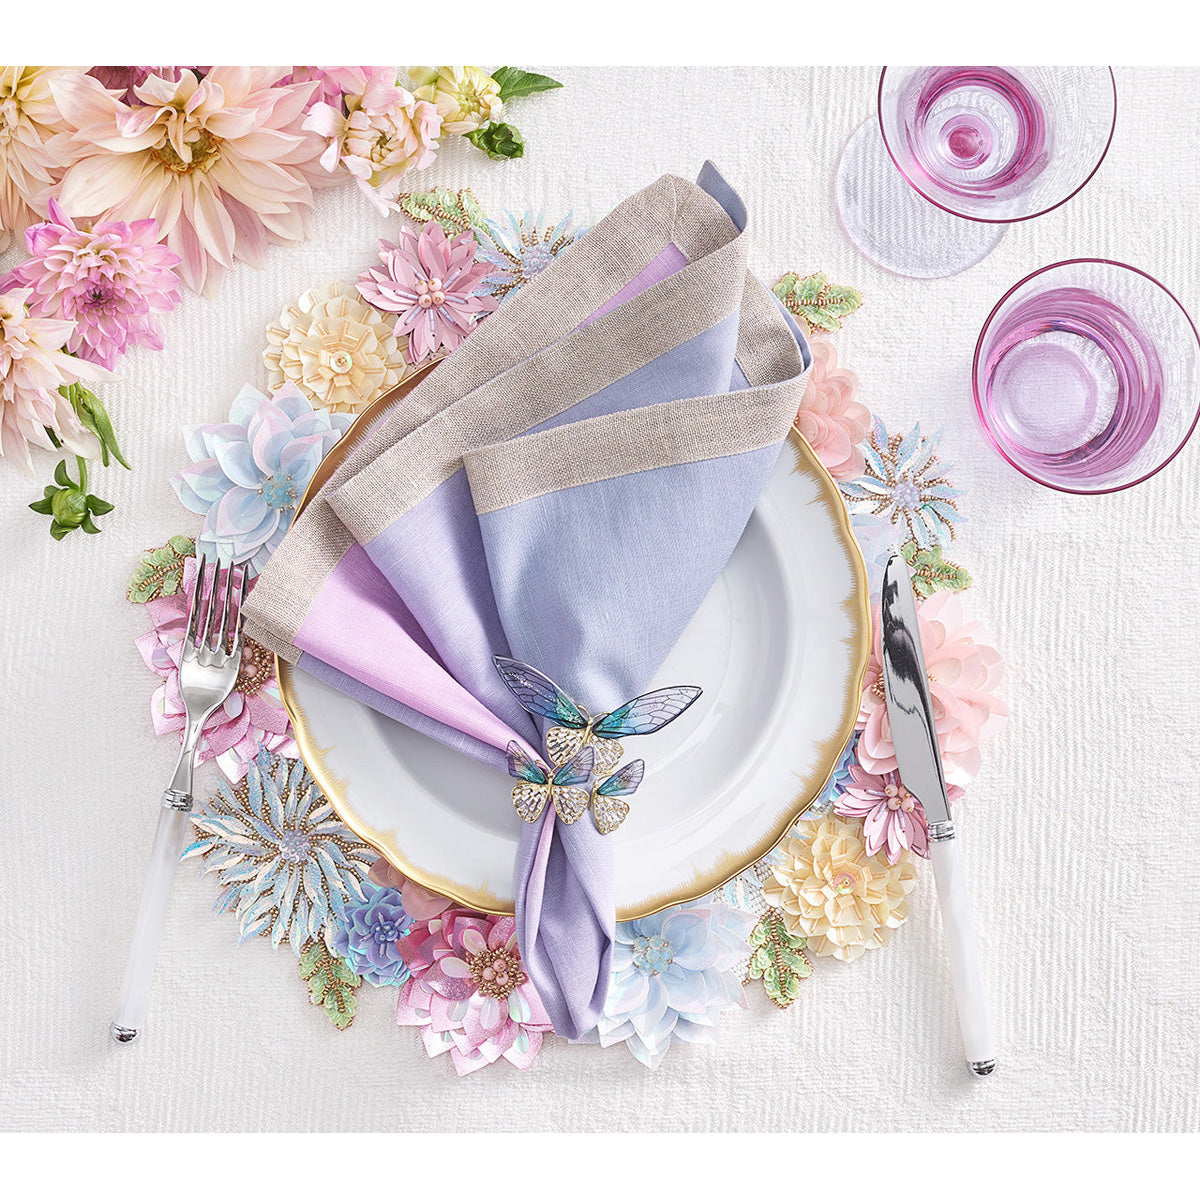 Flutter Napkin Ring in Lilac & Periwinkle - Set of 4 in a Gift Box by Kim Seybert Additional Image-1